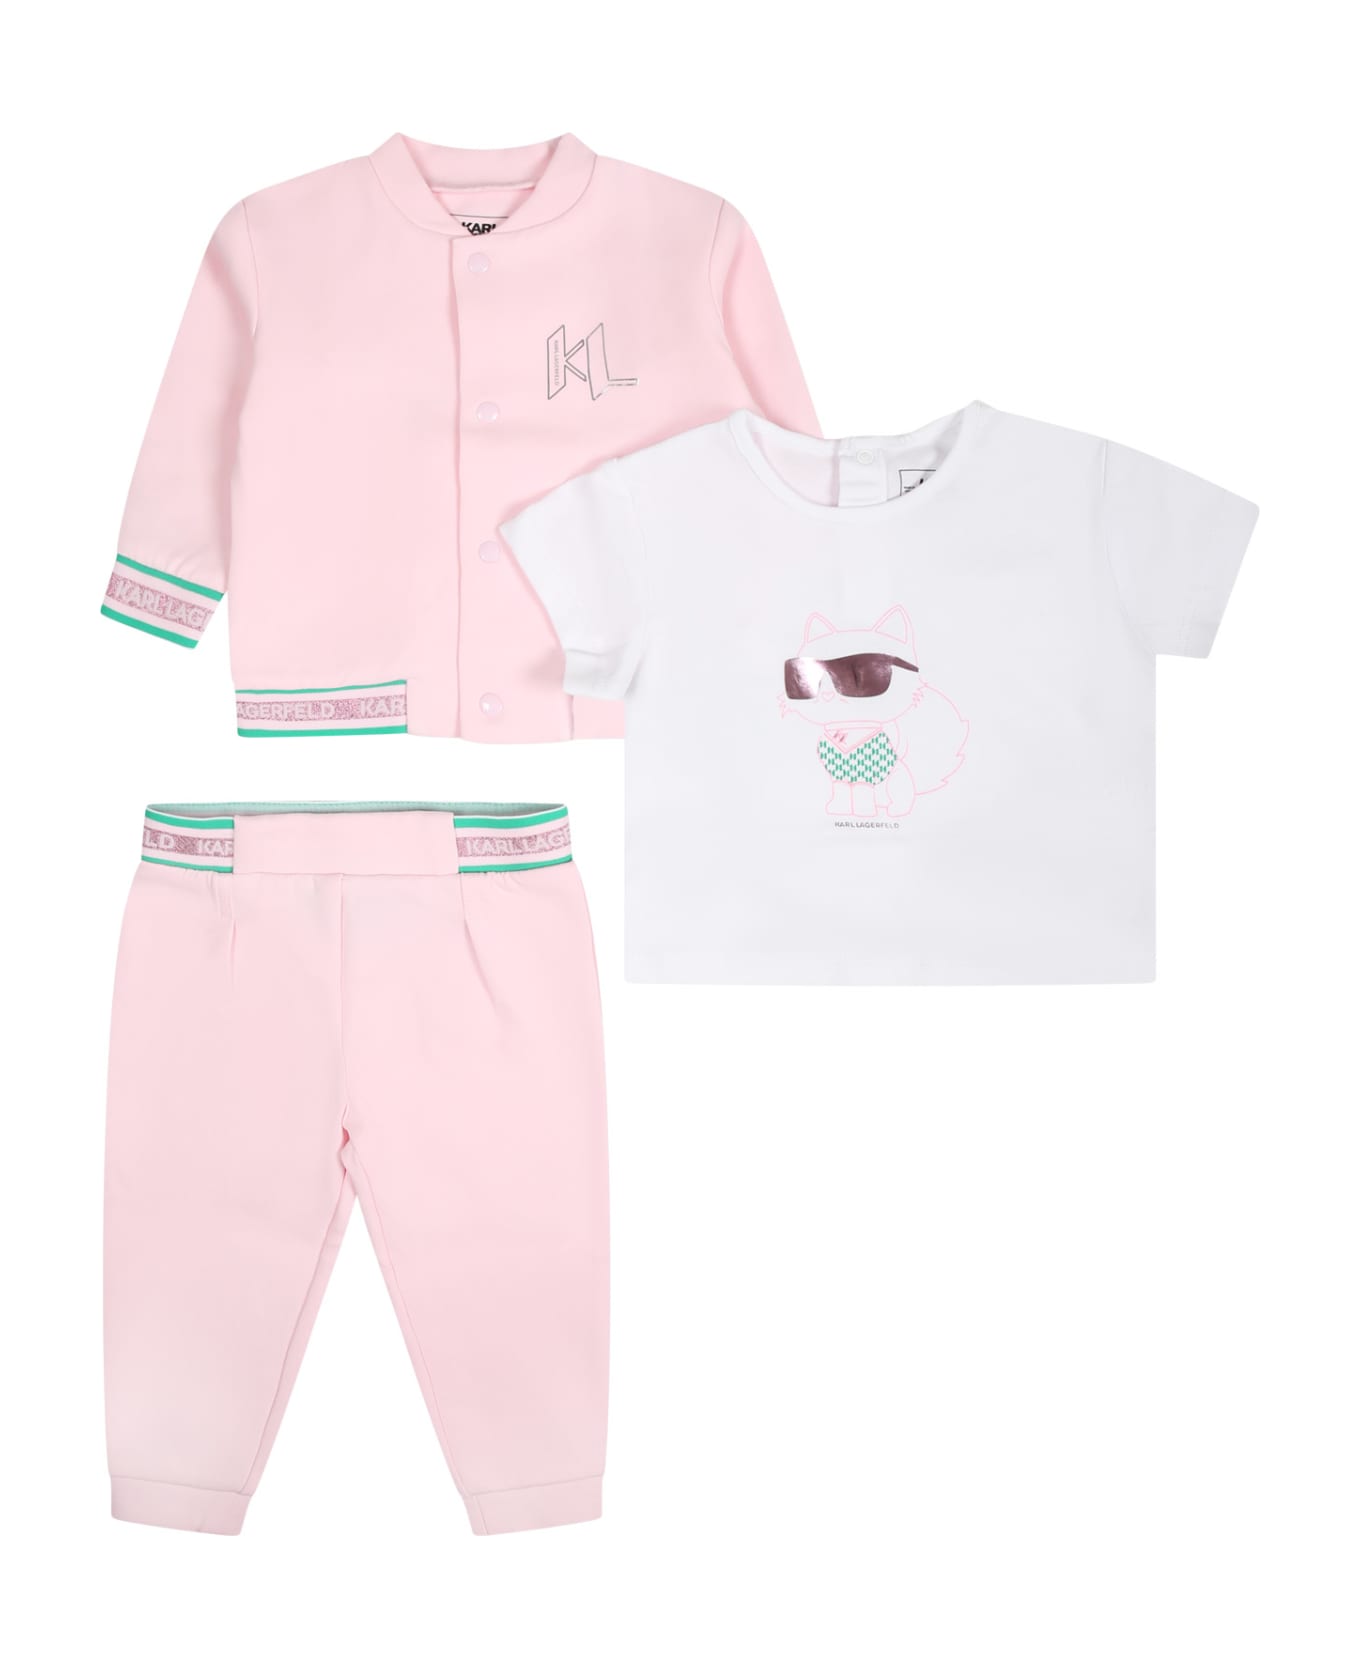 Karl Lagerfeld Kids Pink Set For Baby Girl With Logo - Pink